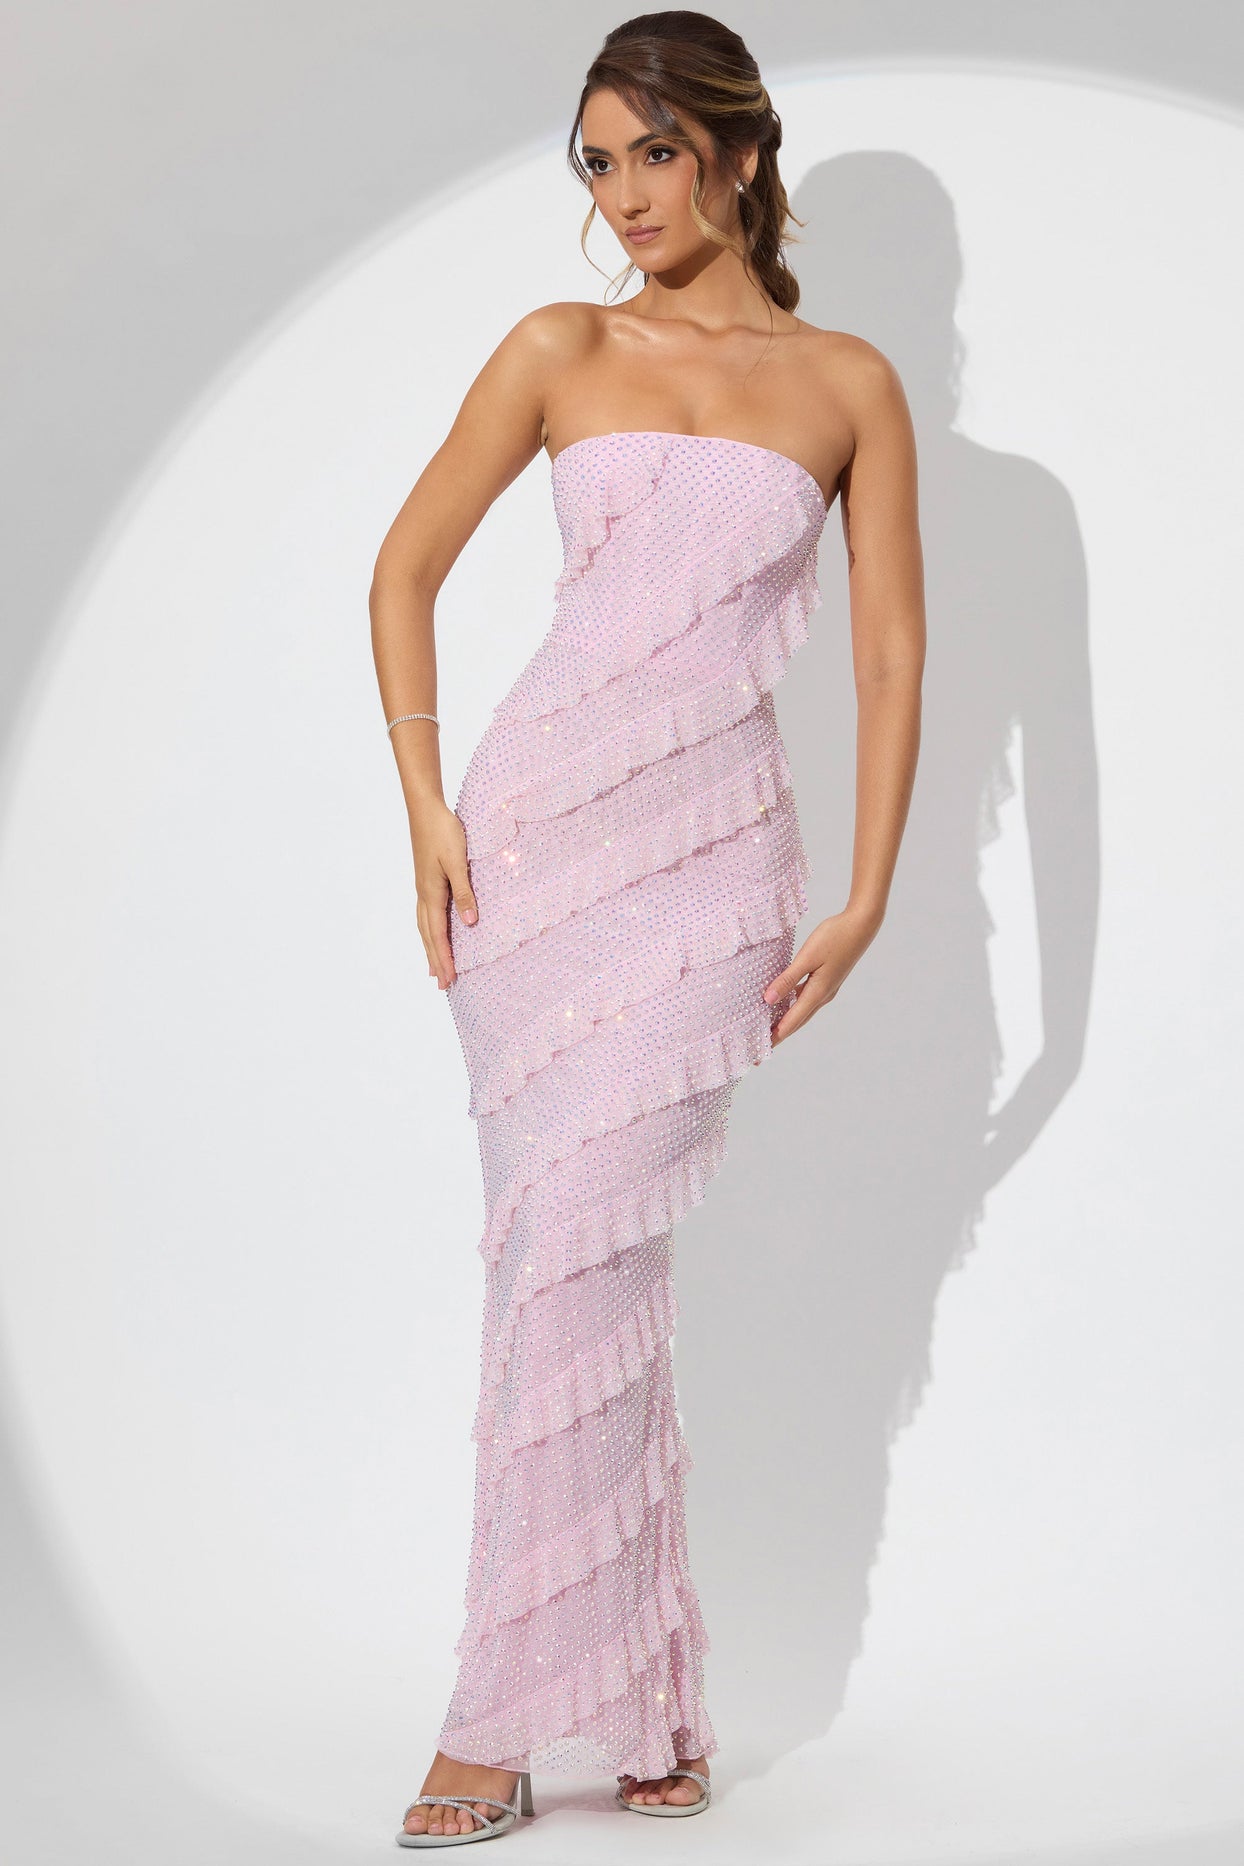 Embellished Strapless Ruffle Maxi Dress in Soft Pink